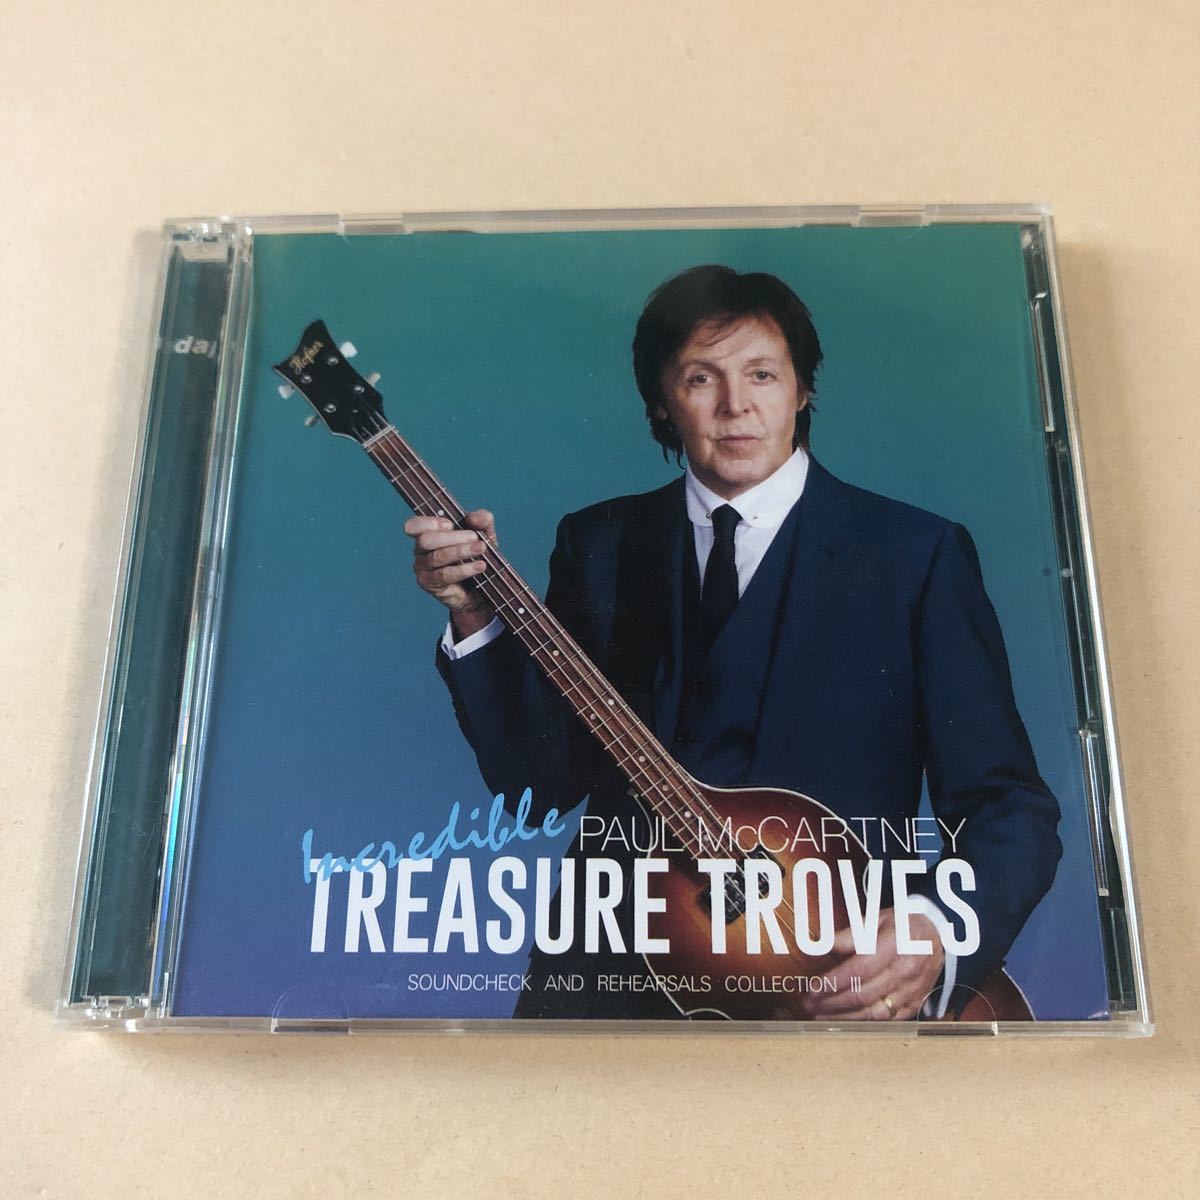 Paul McCartney 2CD「TREASURE TROVES：SOUNDCHEK AND REHEARSALS COLLECTION III」の画像1